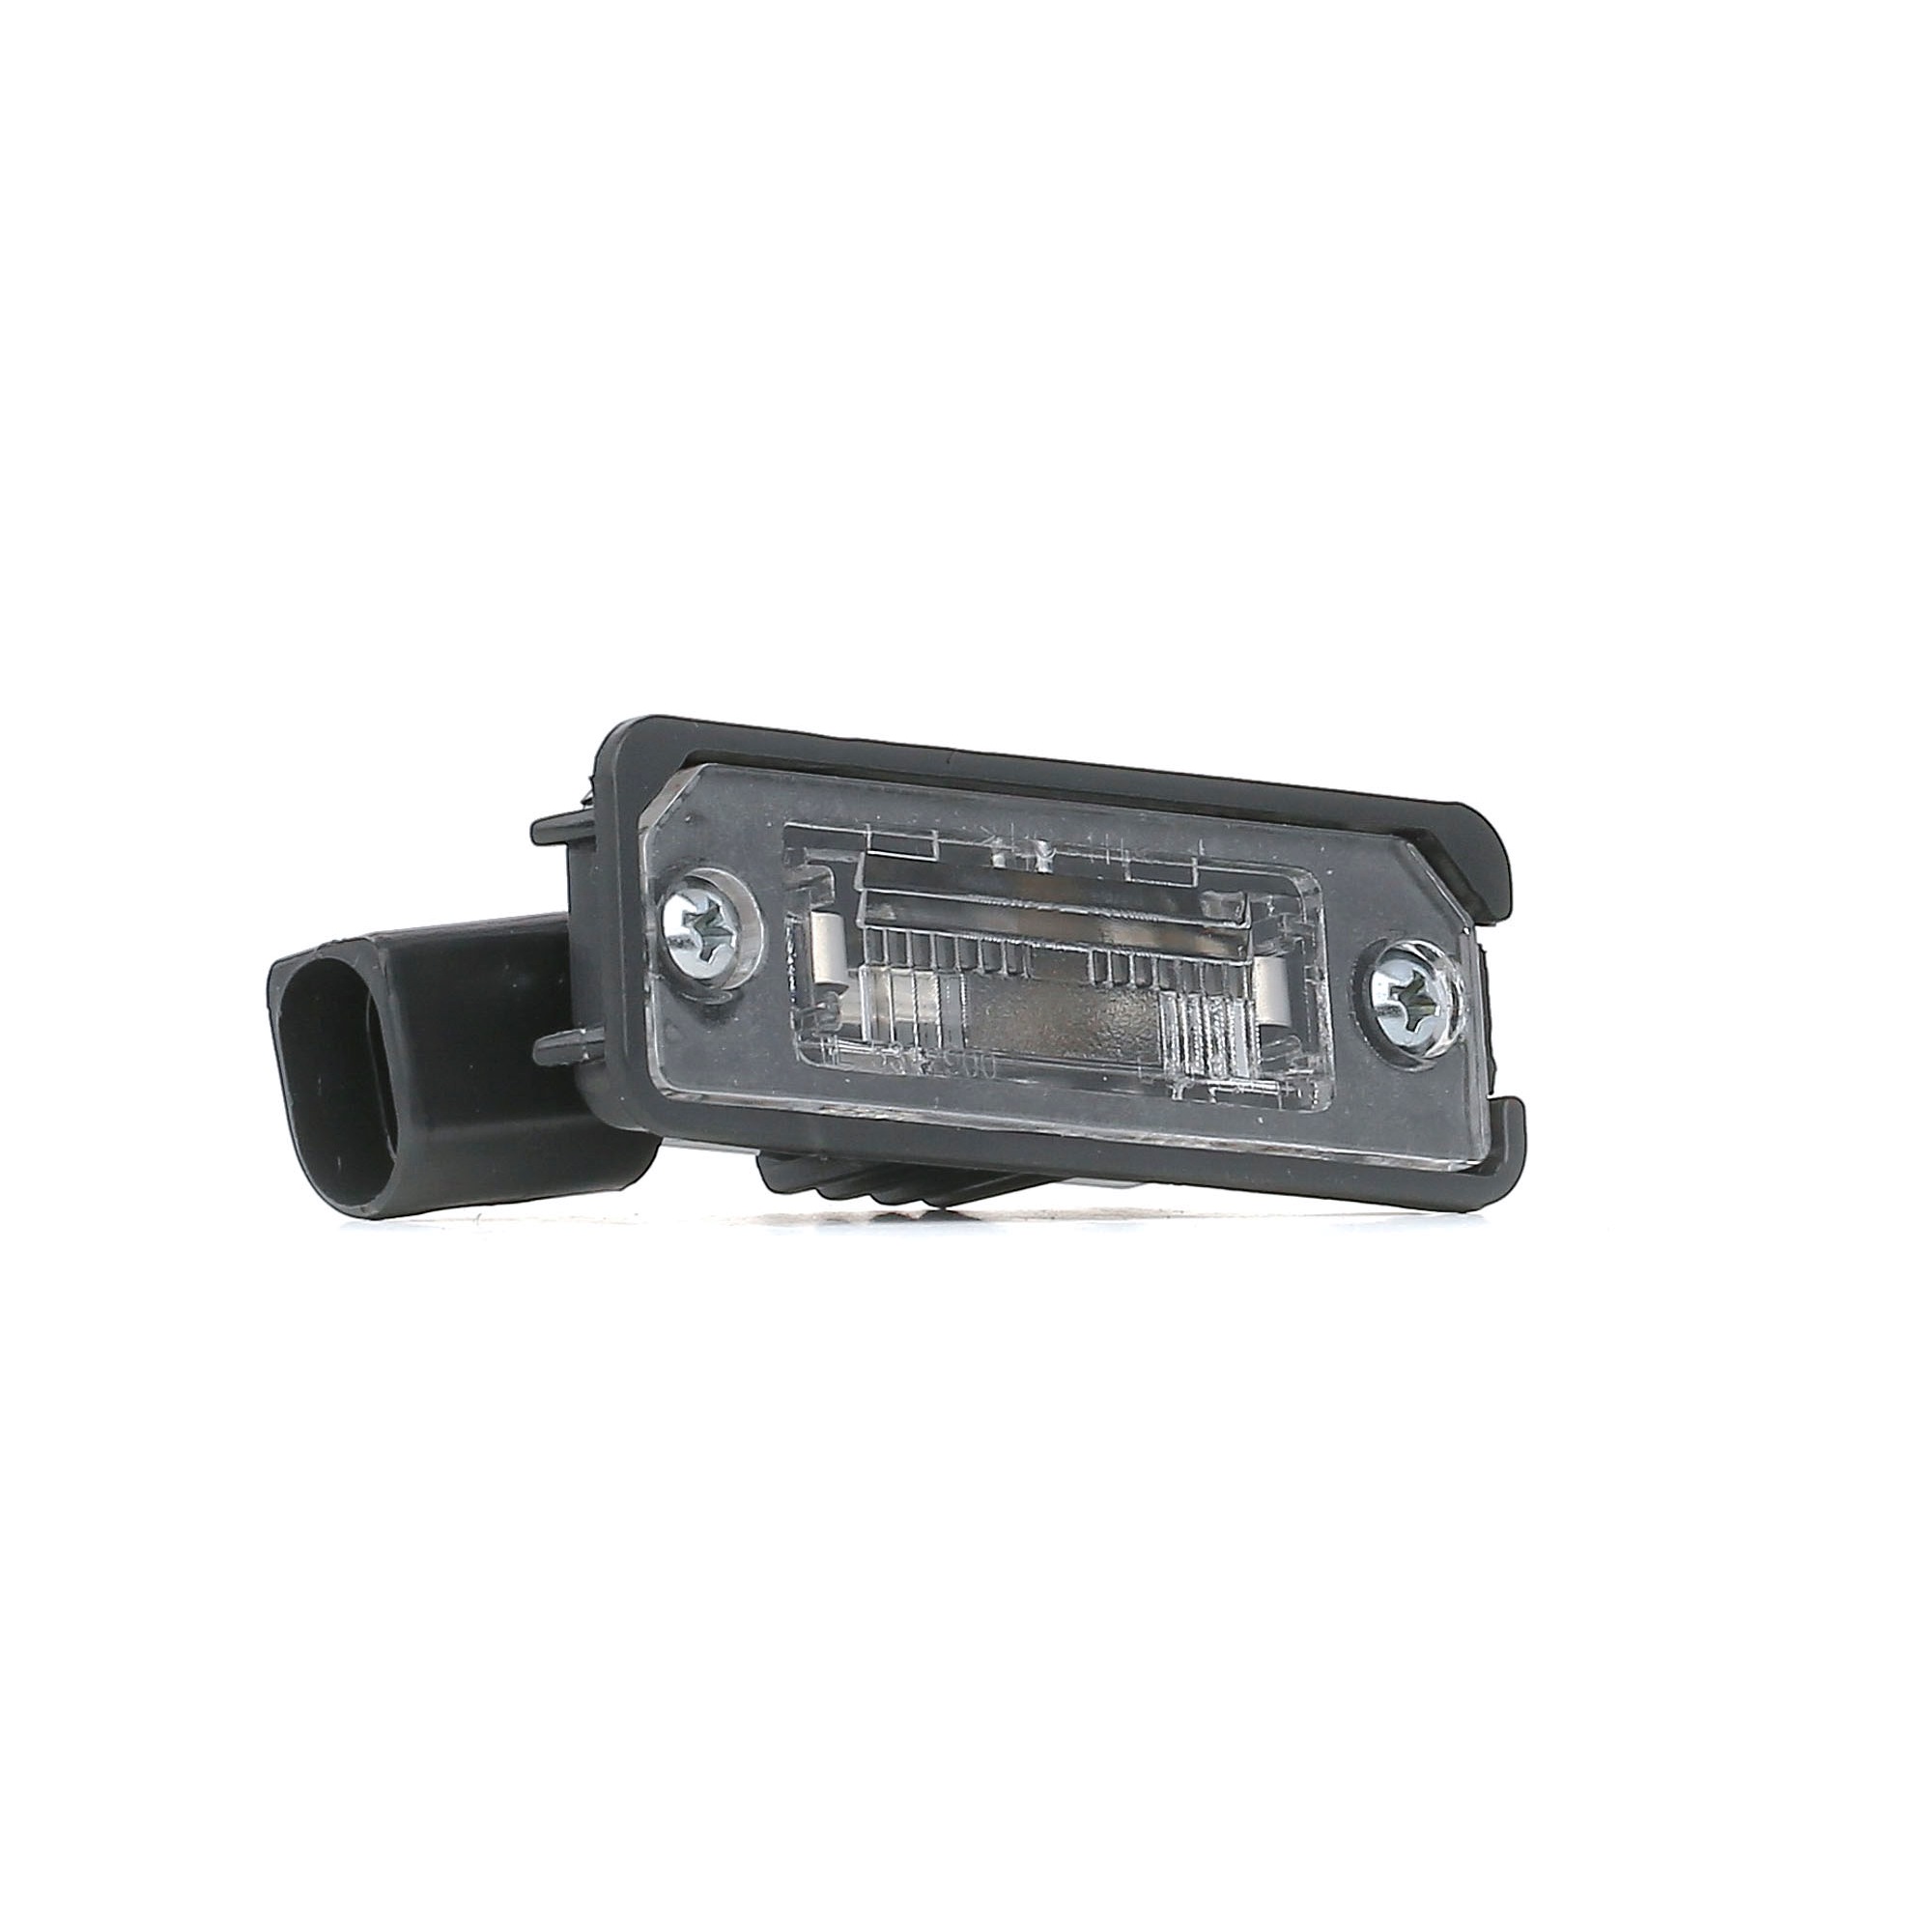 BLIC both sides, with bulb Licence Plate Light 5402-053-10-905 buy